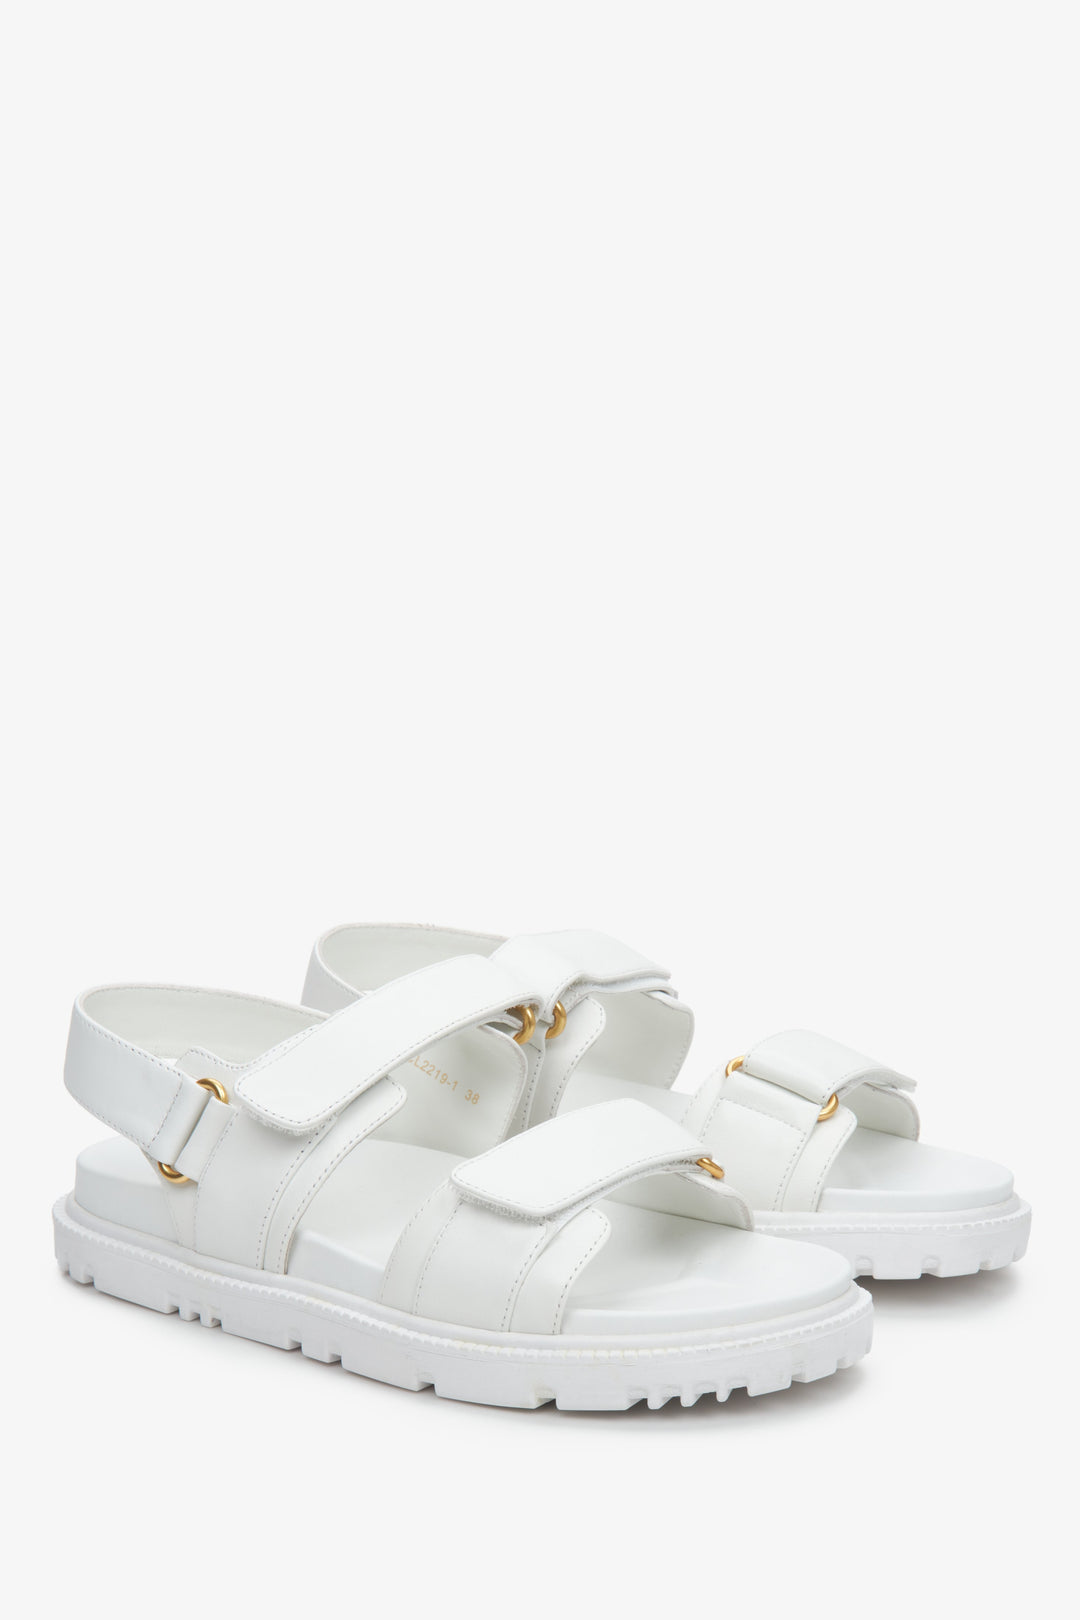 Women's white sandals with a flexible sole and golden embellishments.